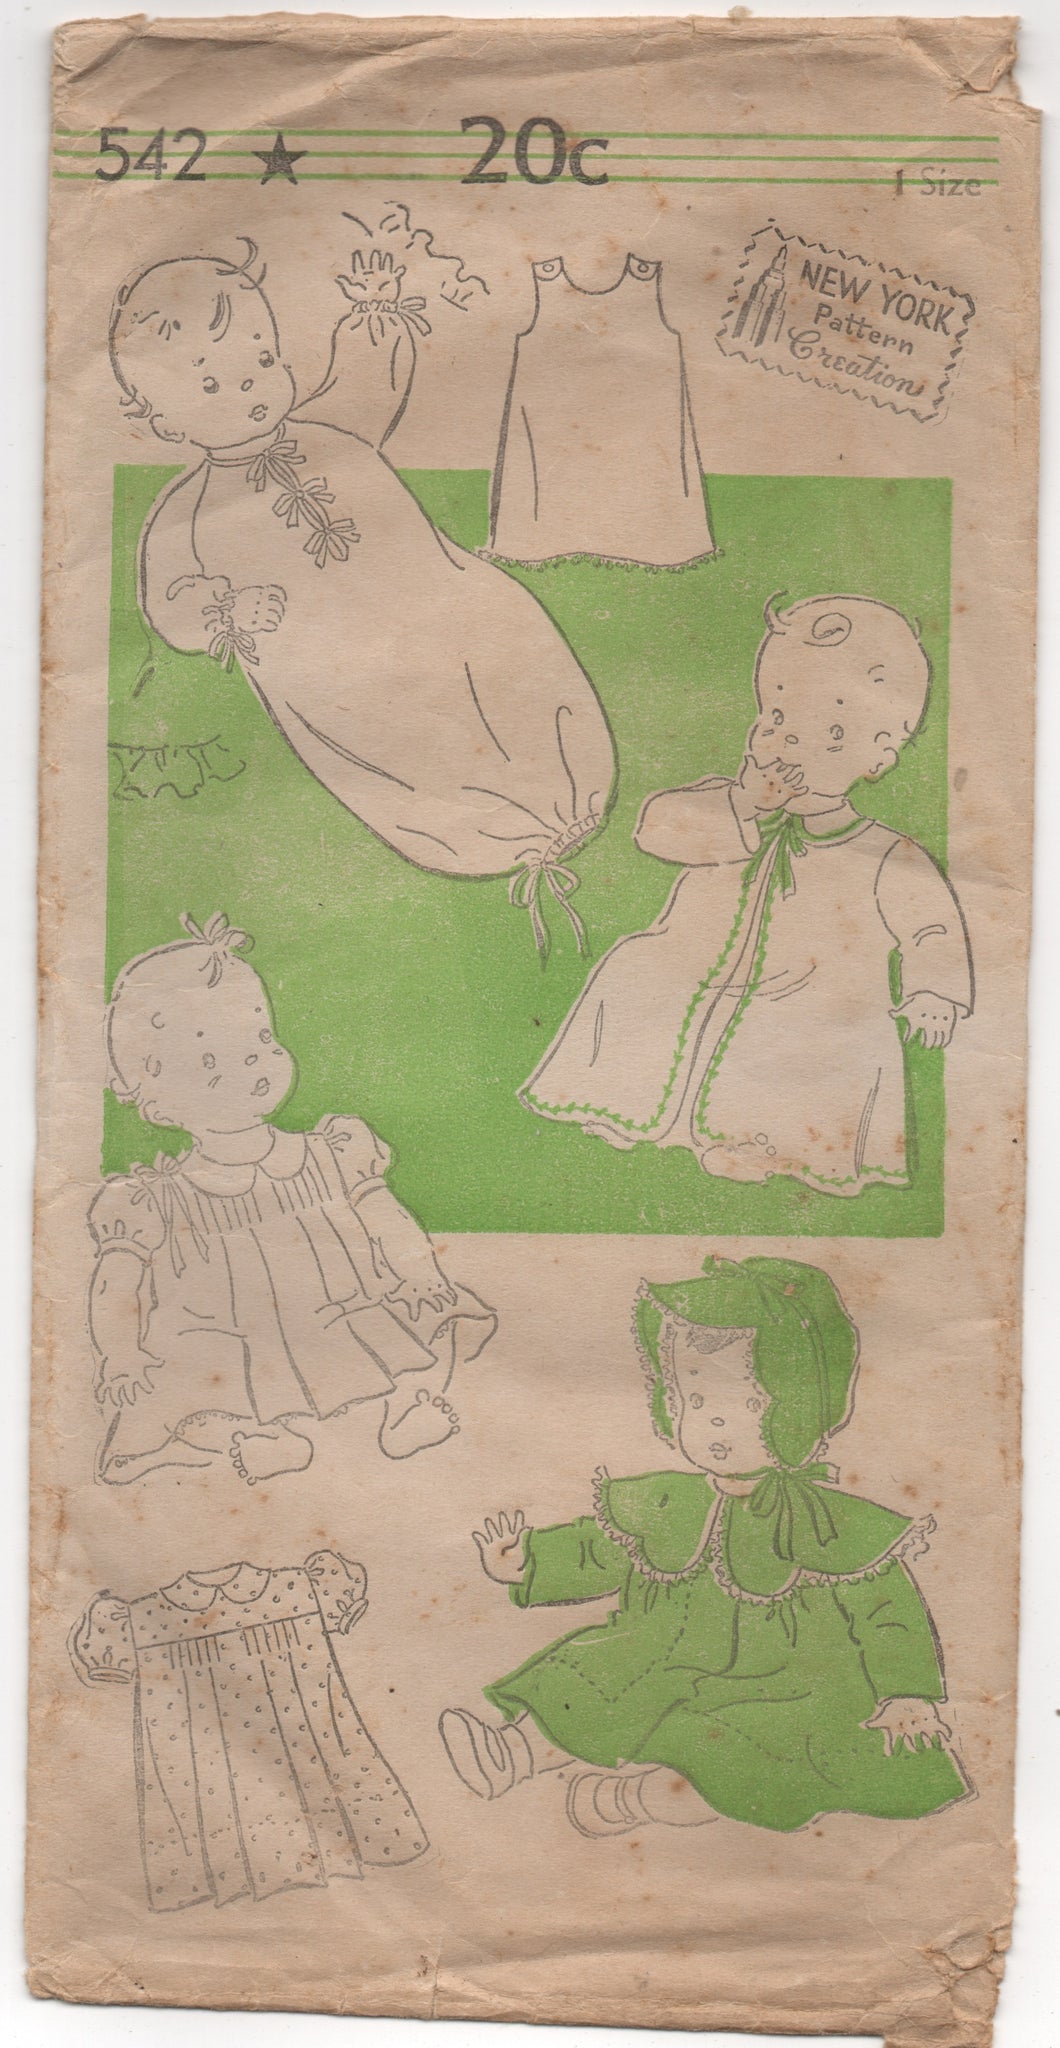 1940's New York Infant's Layette - No. 542